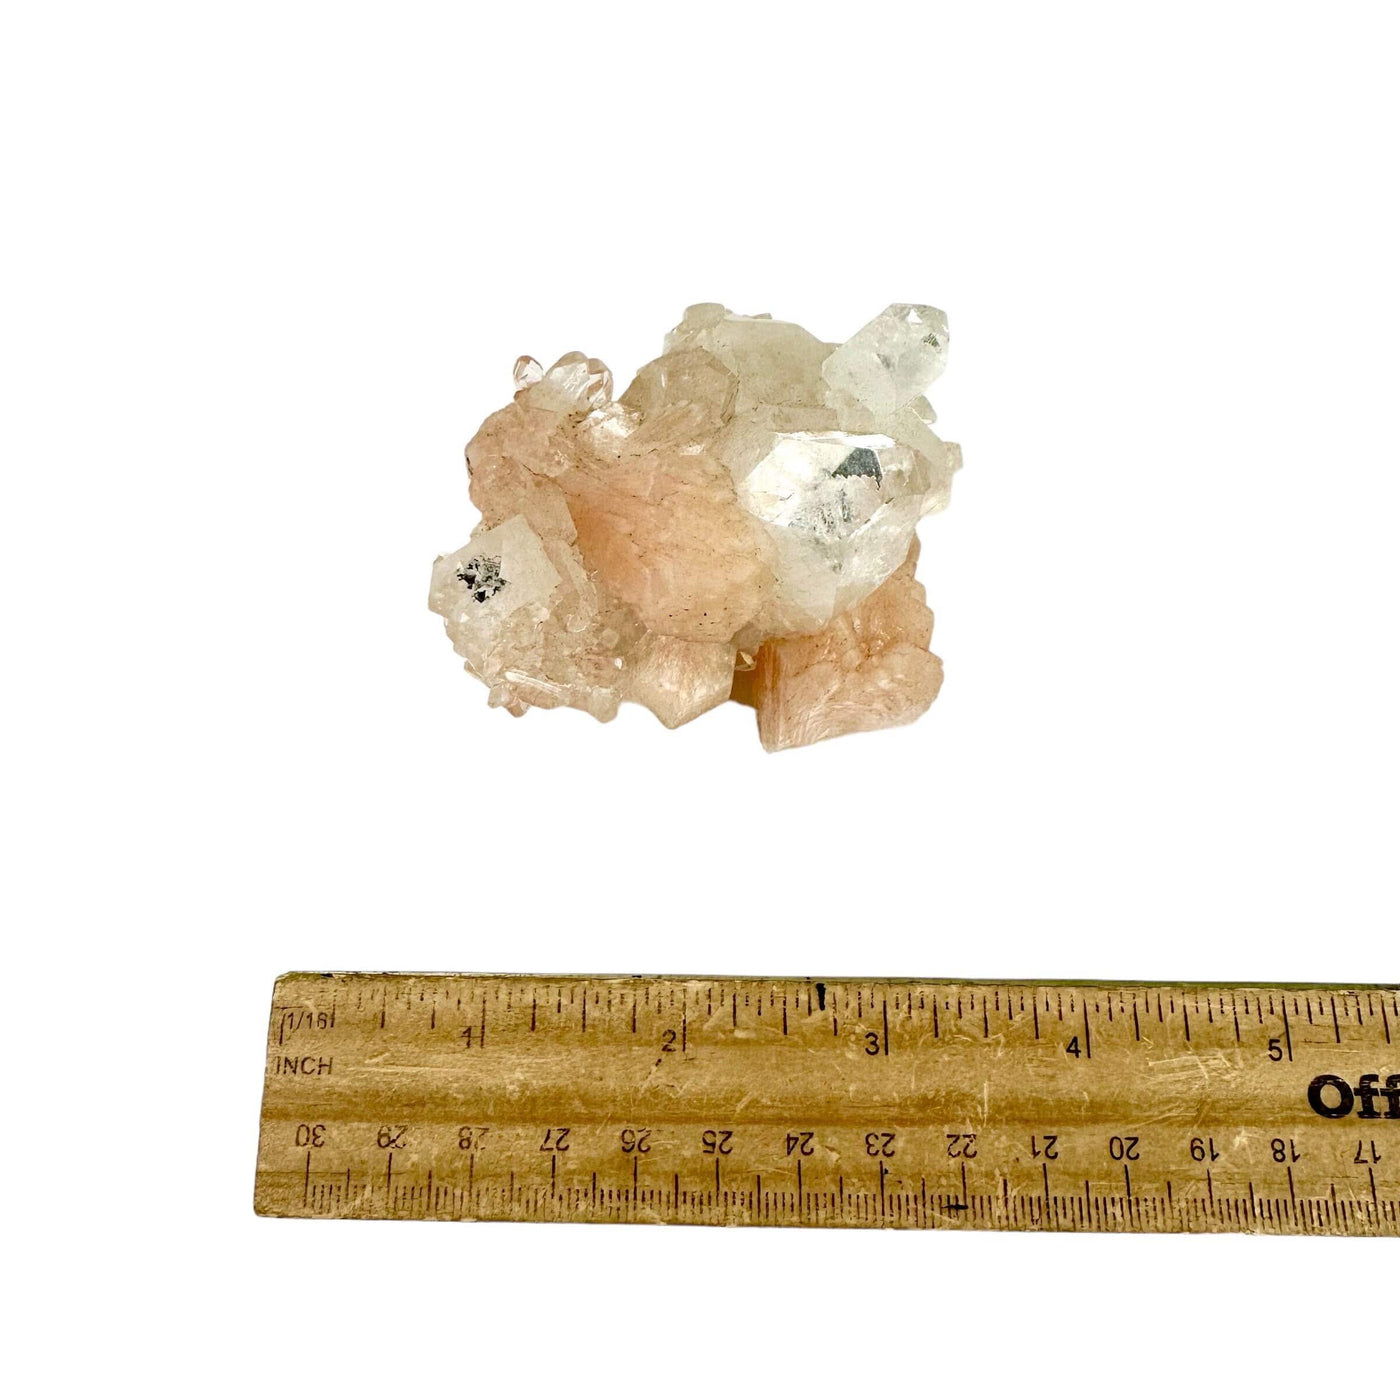 Peach Stilbite Crystal with Apophyllite top view with ruler for size reference